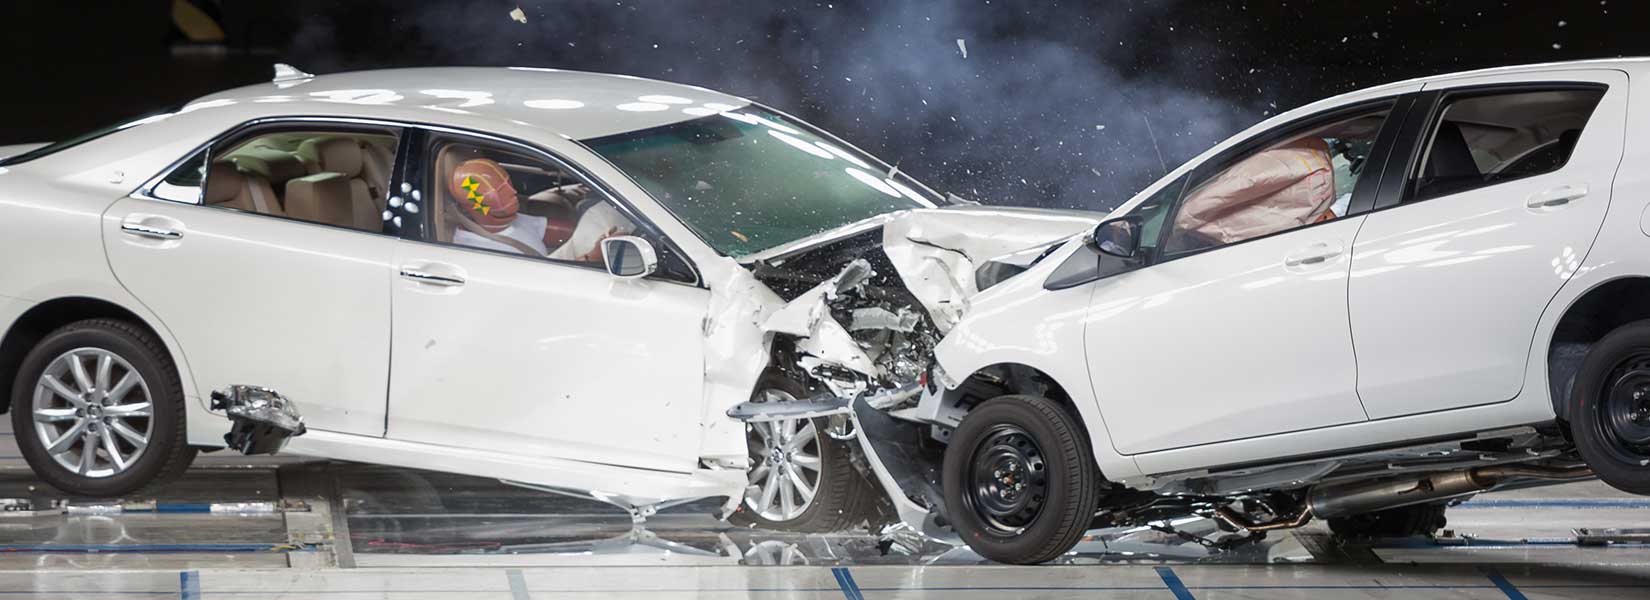 Crucial Steps to Take After an Ohio Car Accident